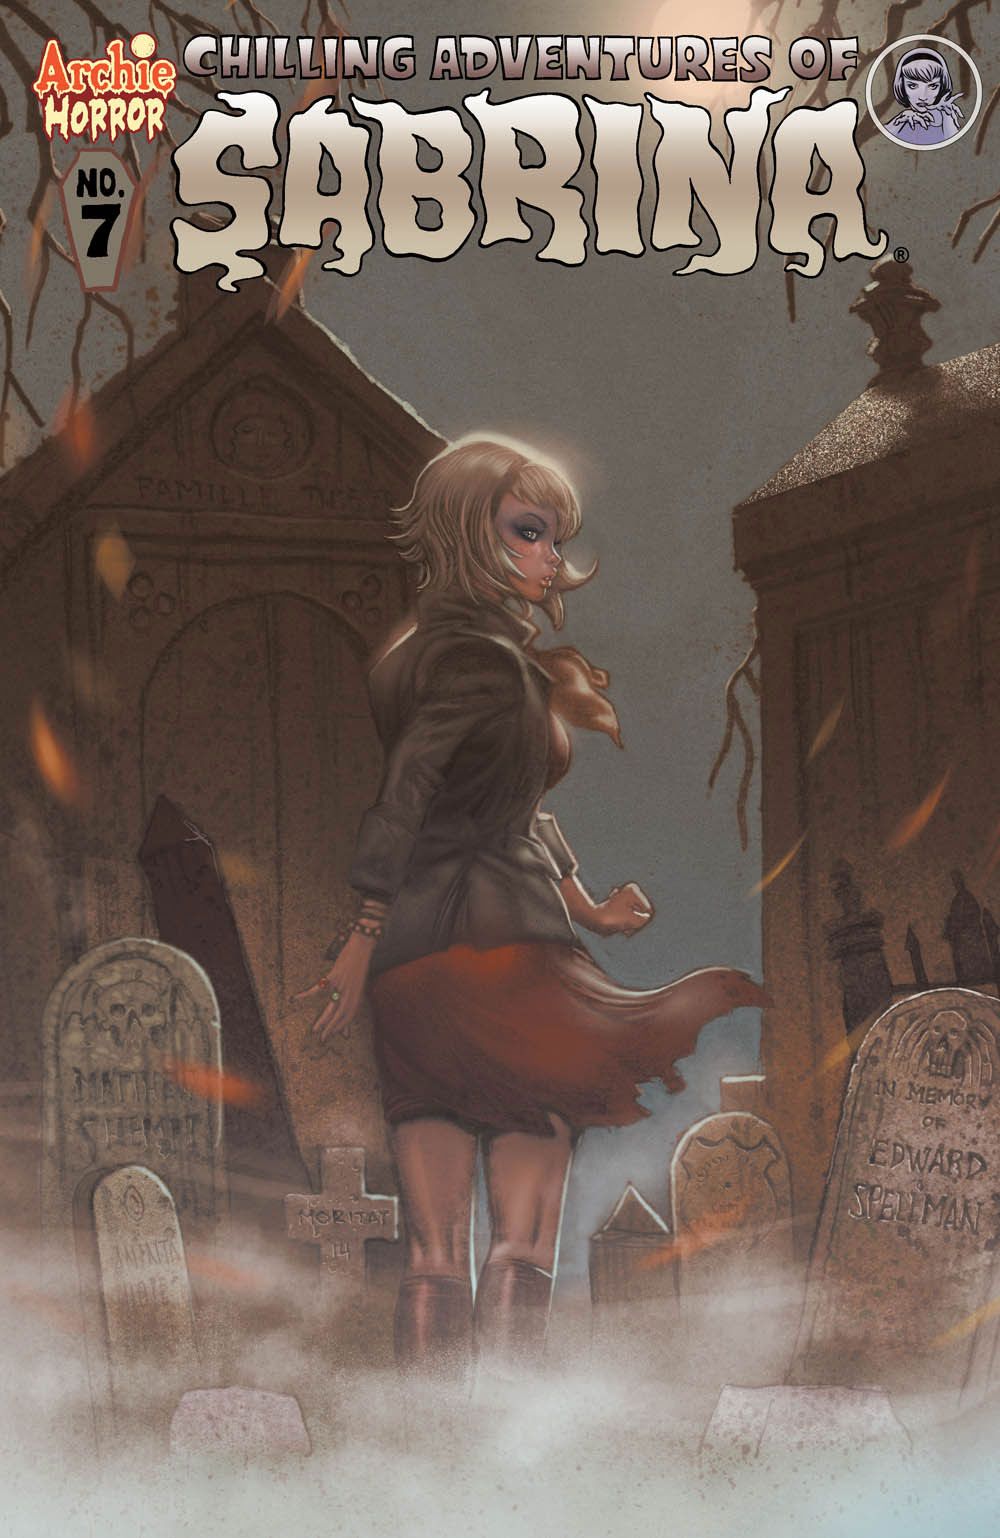 Chilling Adventures of Sabrina #7 variant cover